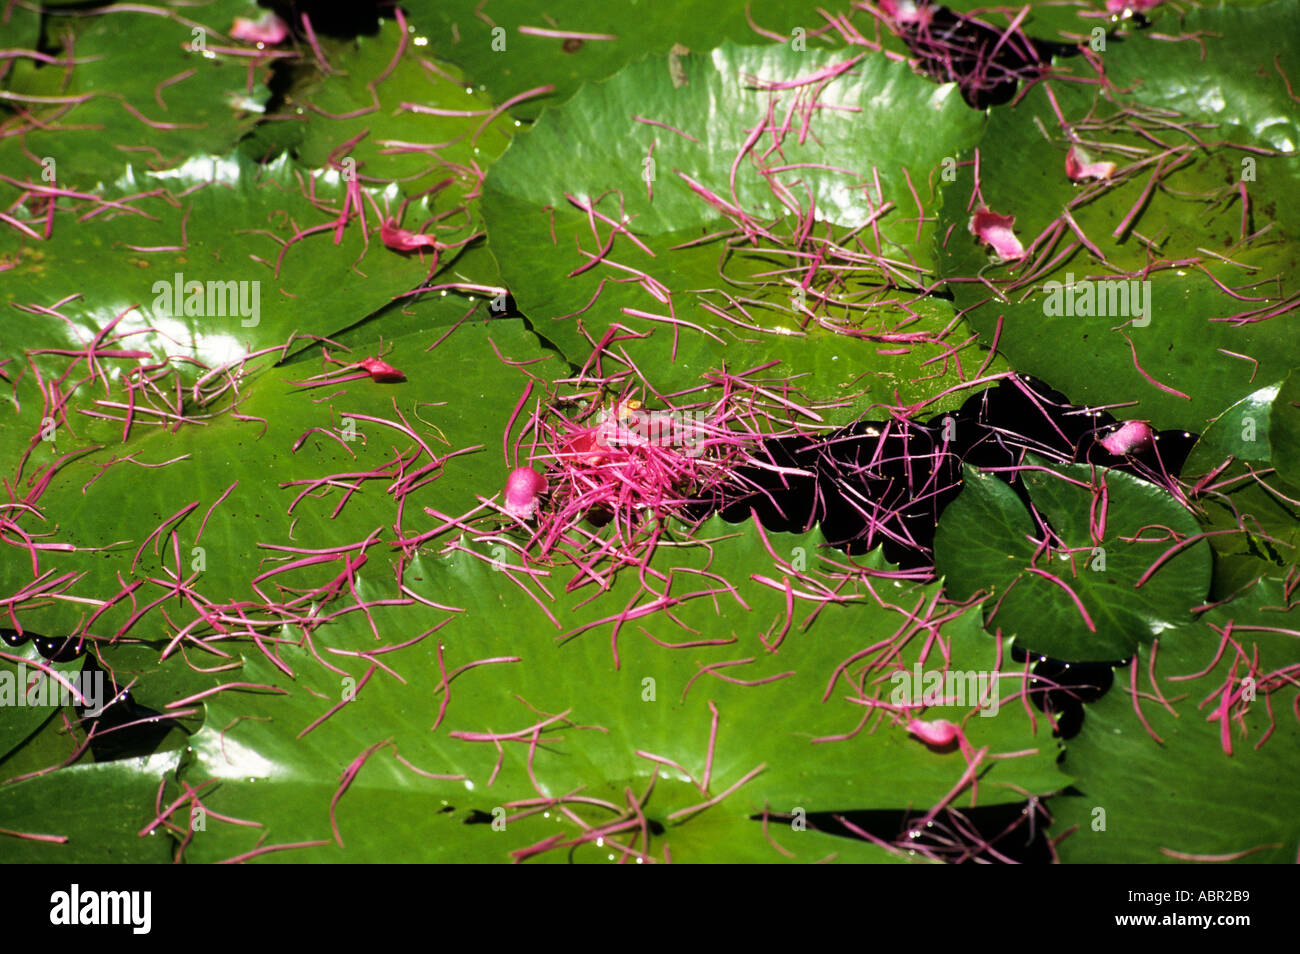 Manaus, Brazil. Water lilies with bright pink flower petals scattered over the lily pads (leaves). Stock Photo